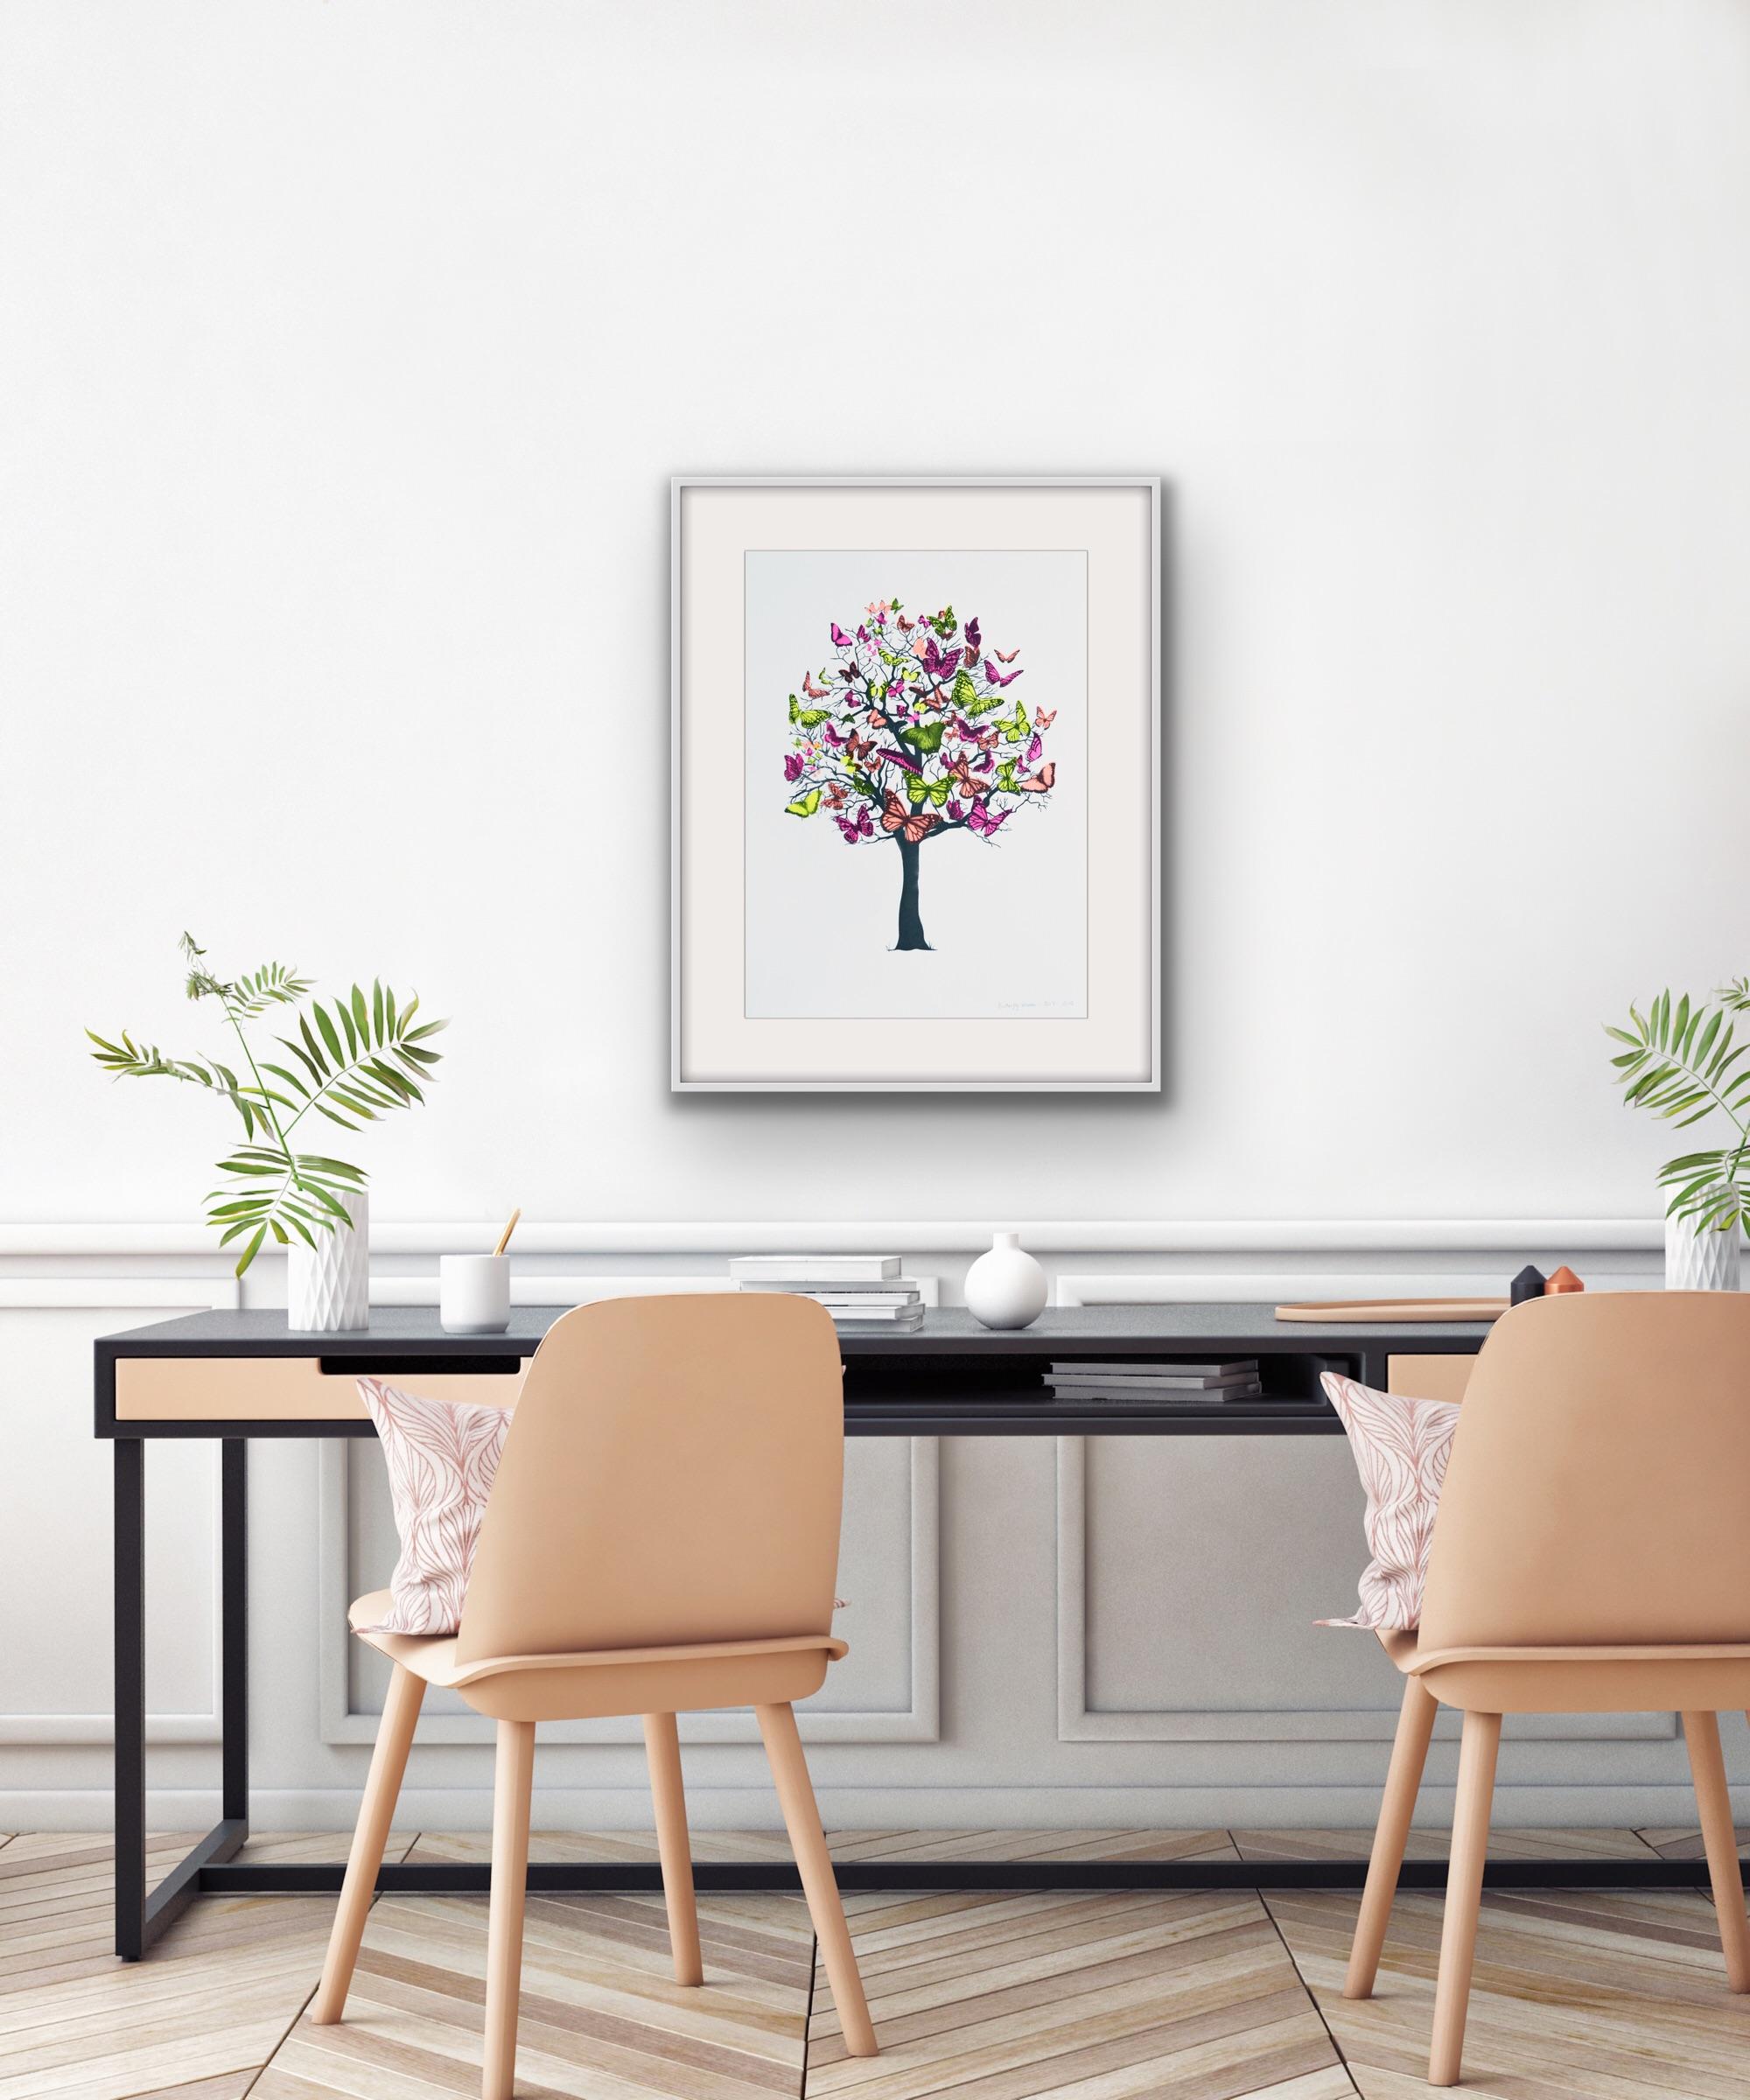 Butterfly Blossom, Anne Storno, Limited edition print, Contemporary art - Print by Anne Storno 